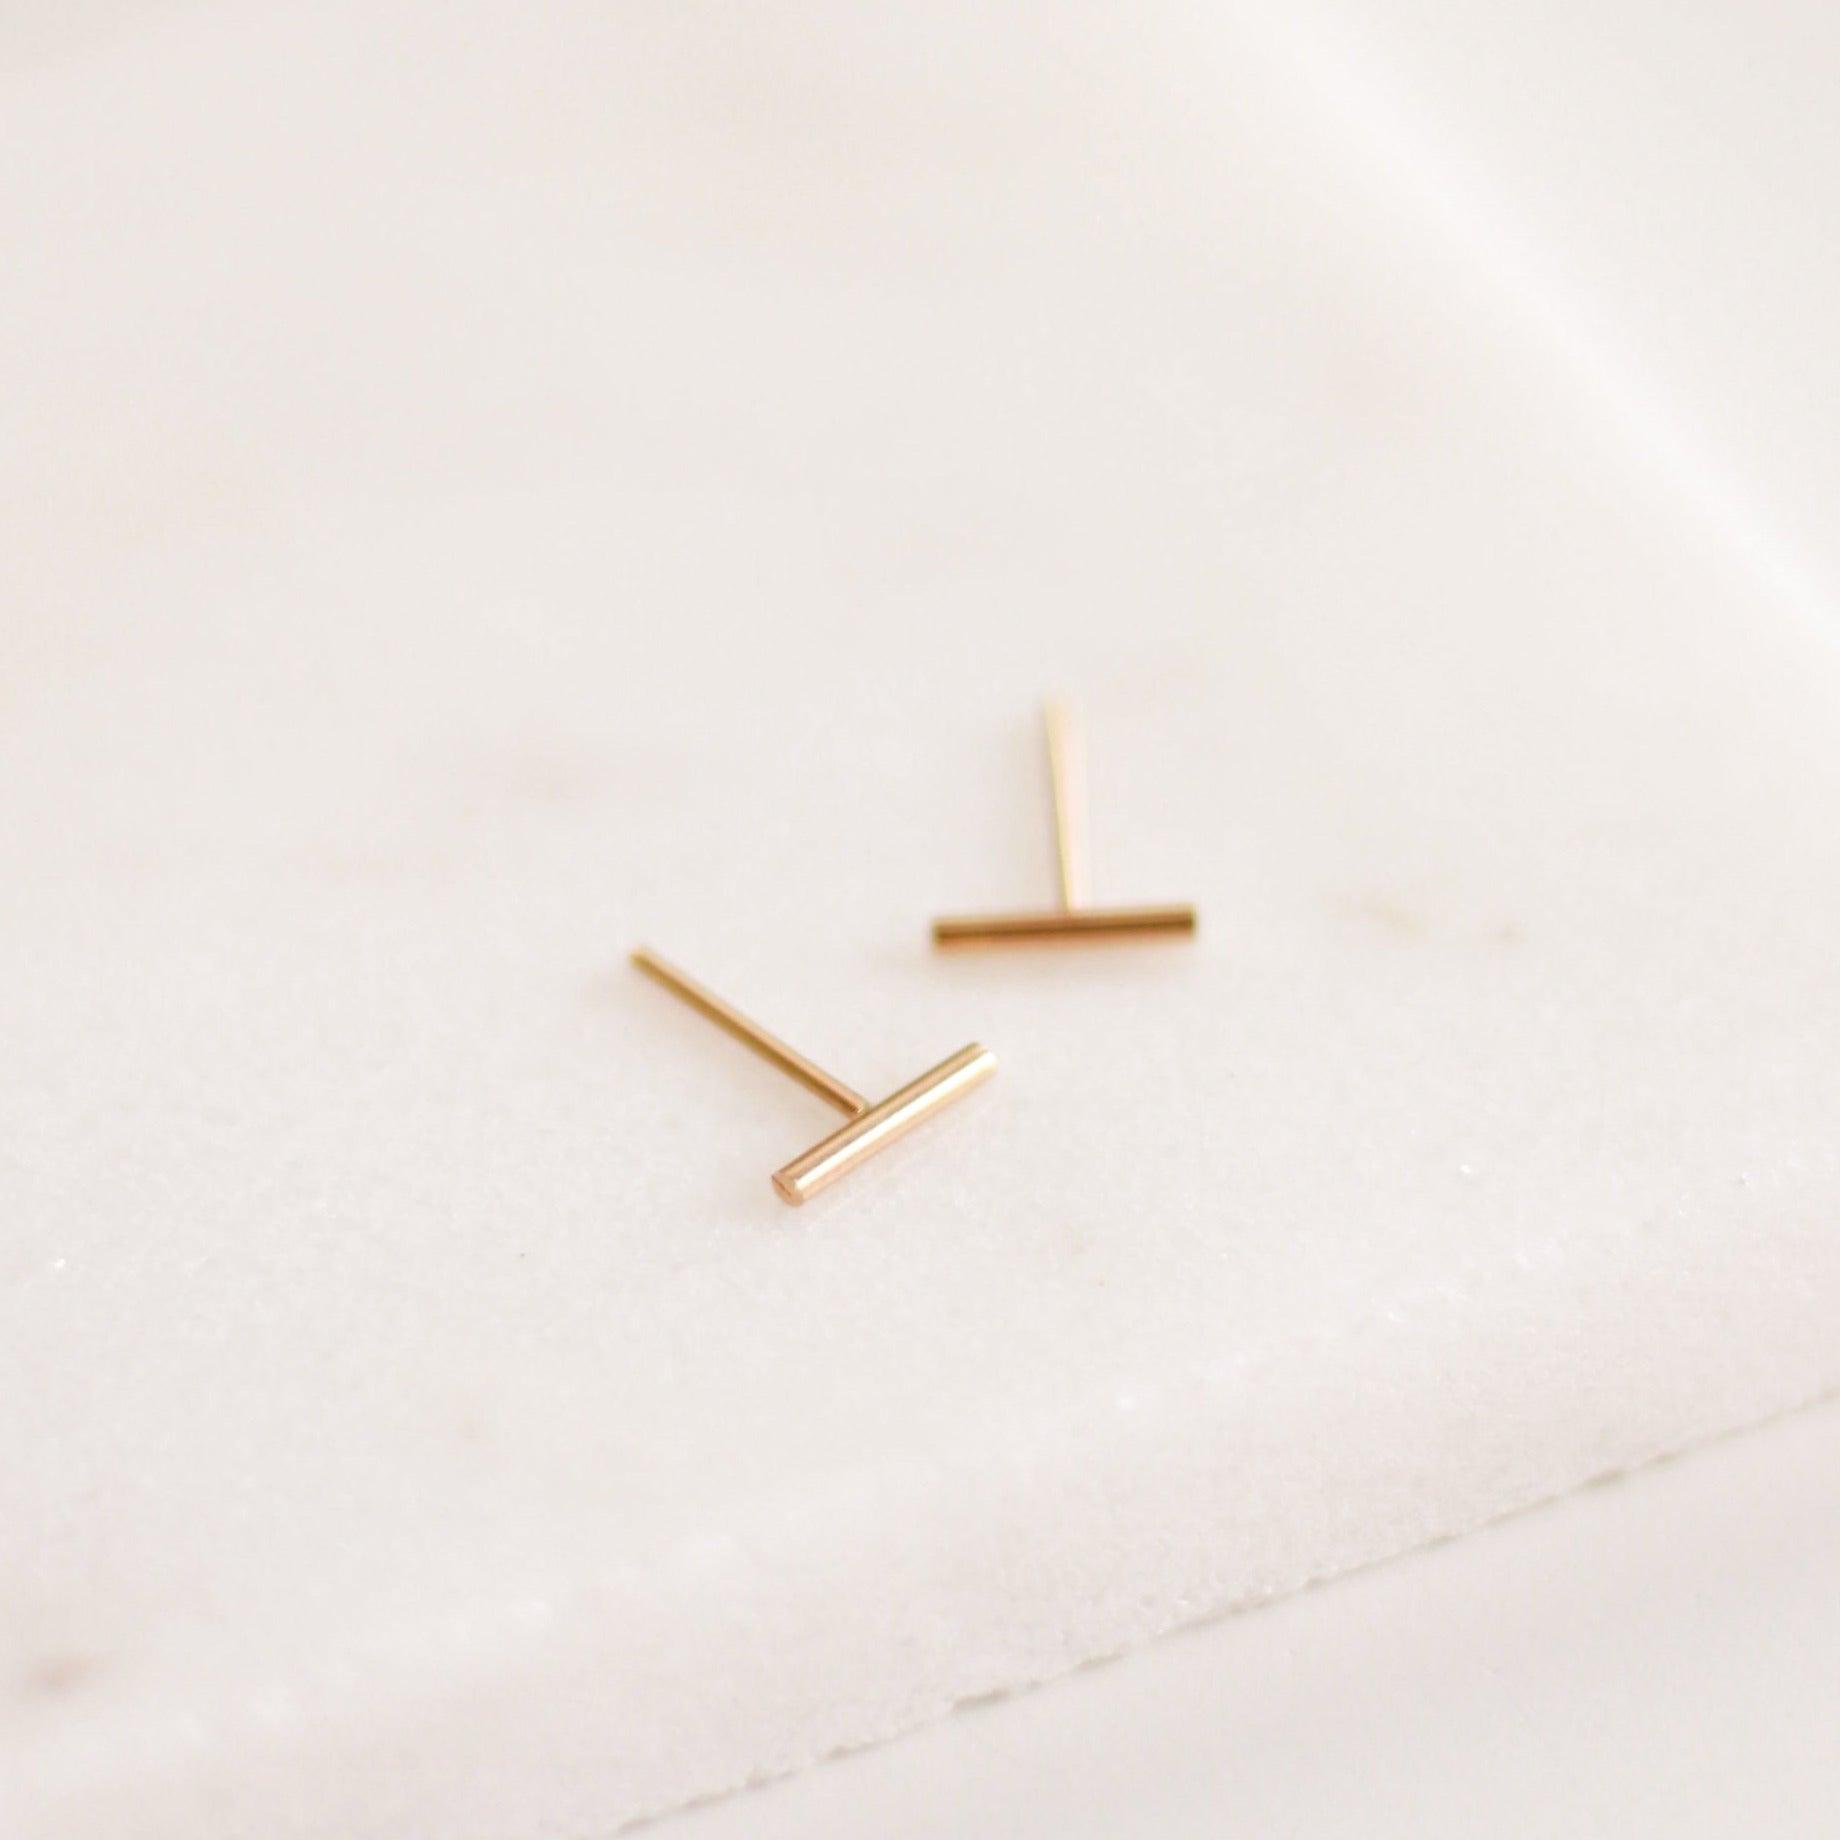 Tiny Bar Stud Earrings - Nolia Jewelry - Meaningful + Sustainably Handcrafted Jewelry